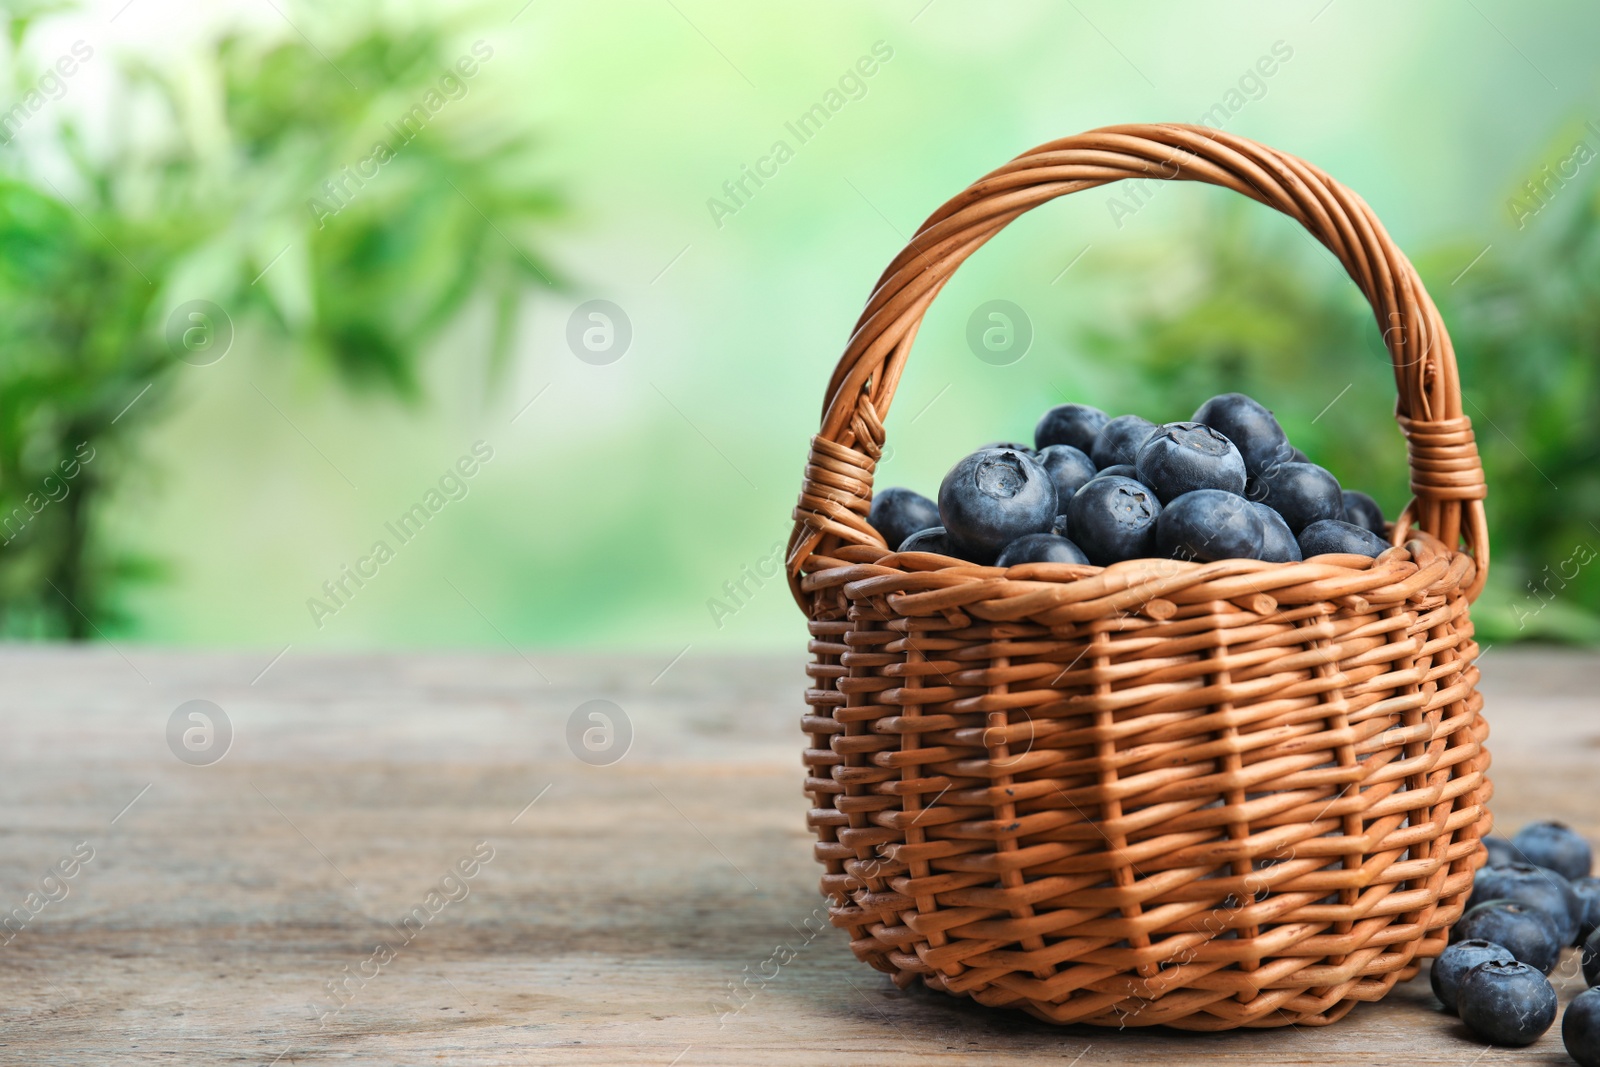 Photo of Wicker basket with fresh blueberries on wooden table against blurred green background, space for text